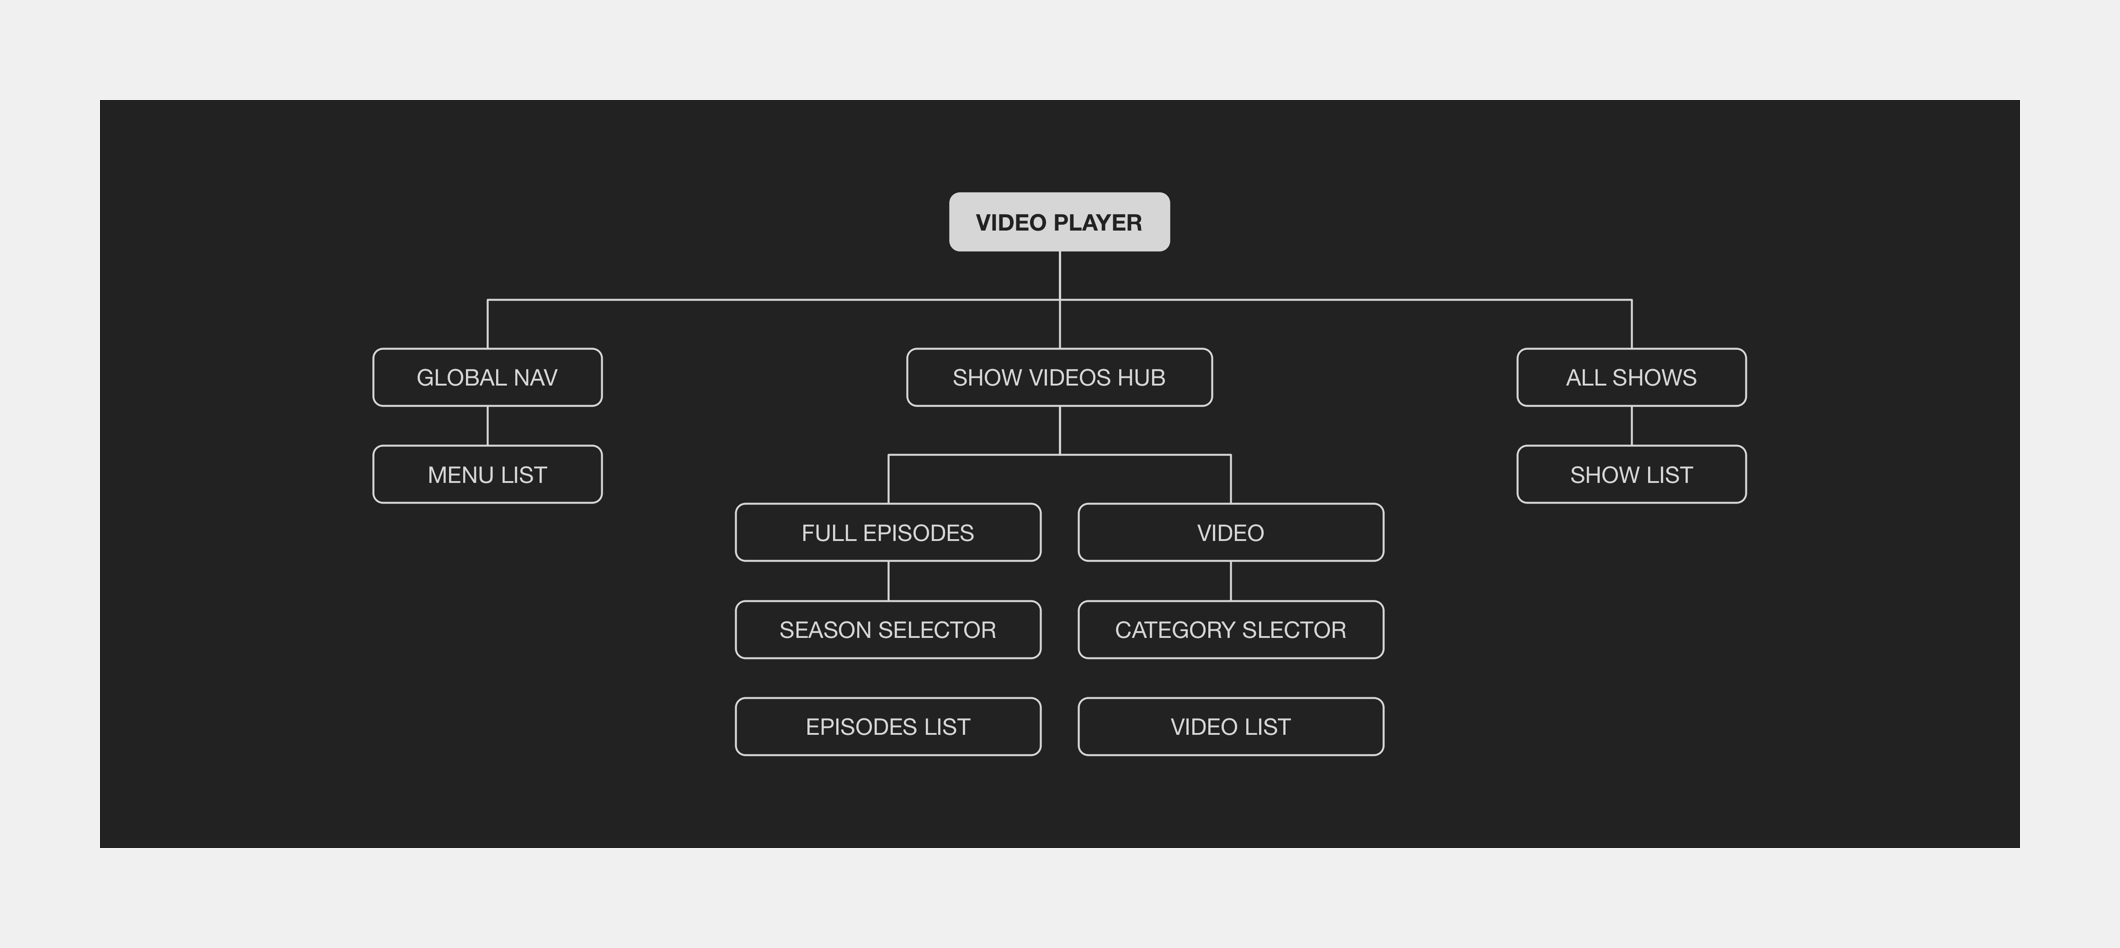 Revised Video Player Architecture